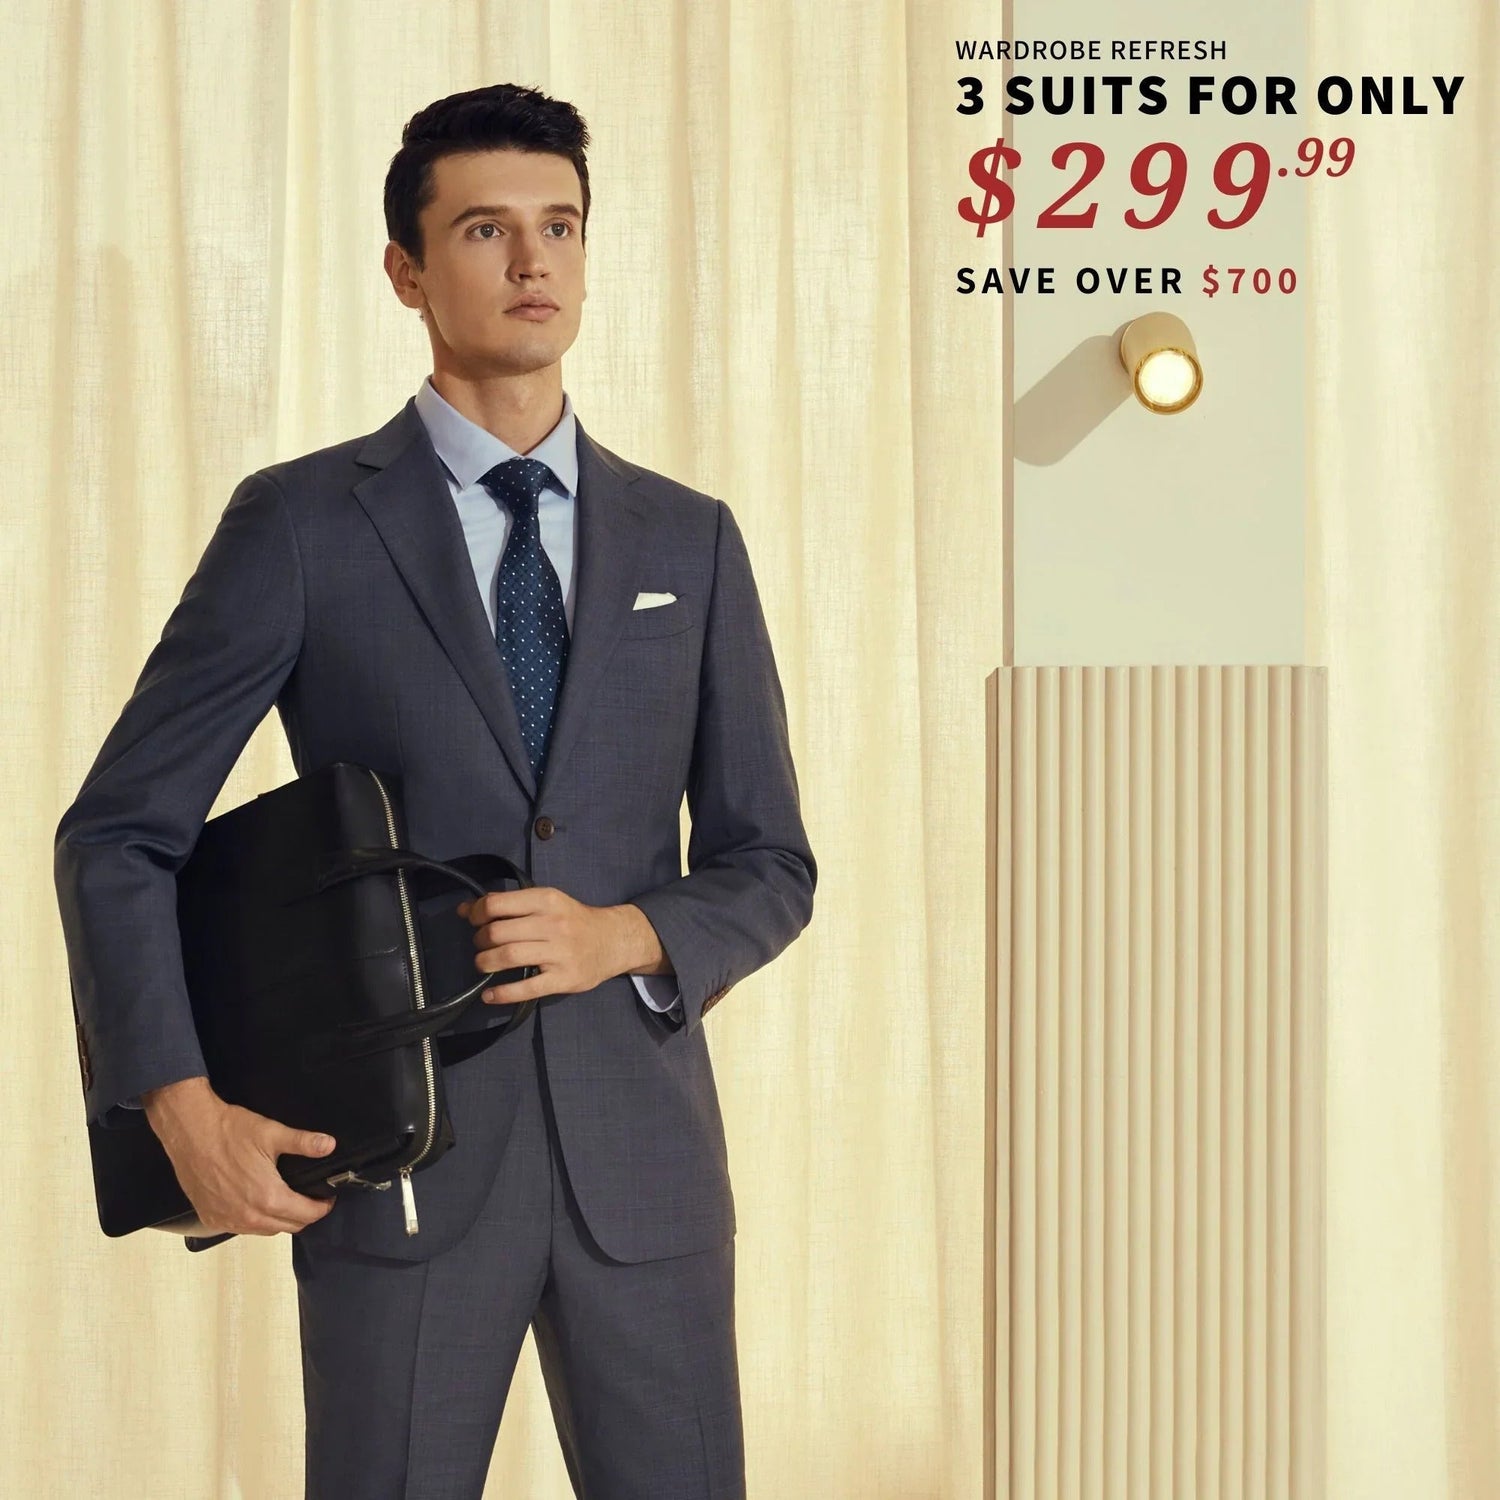 A man in a suit is holding a briefcase while wearing BYOB's 3 Suits for $299.